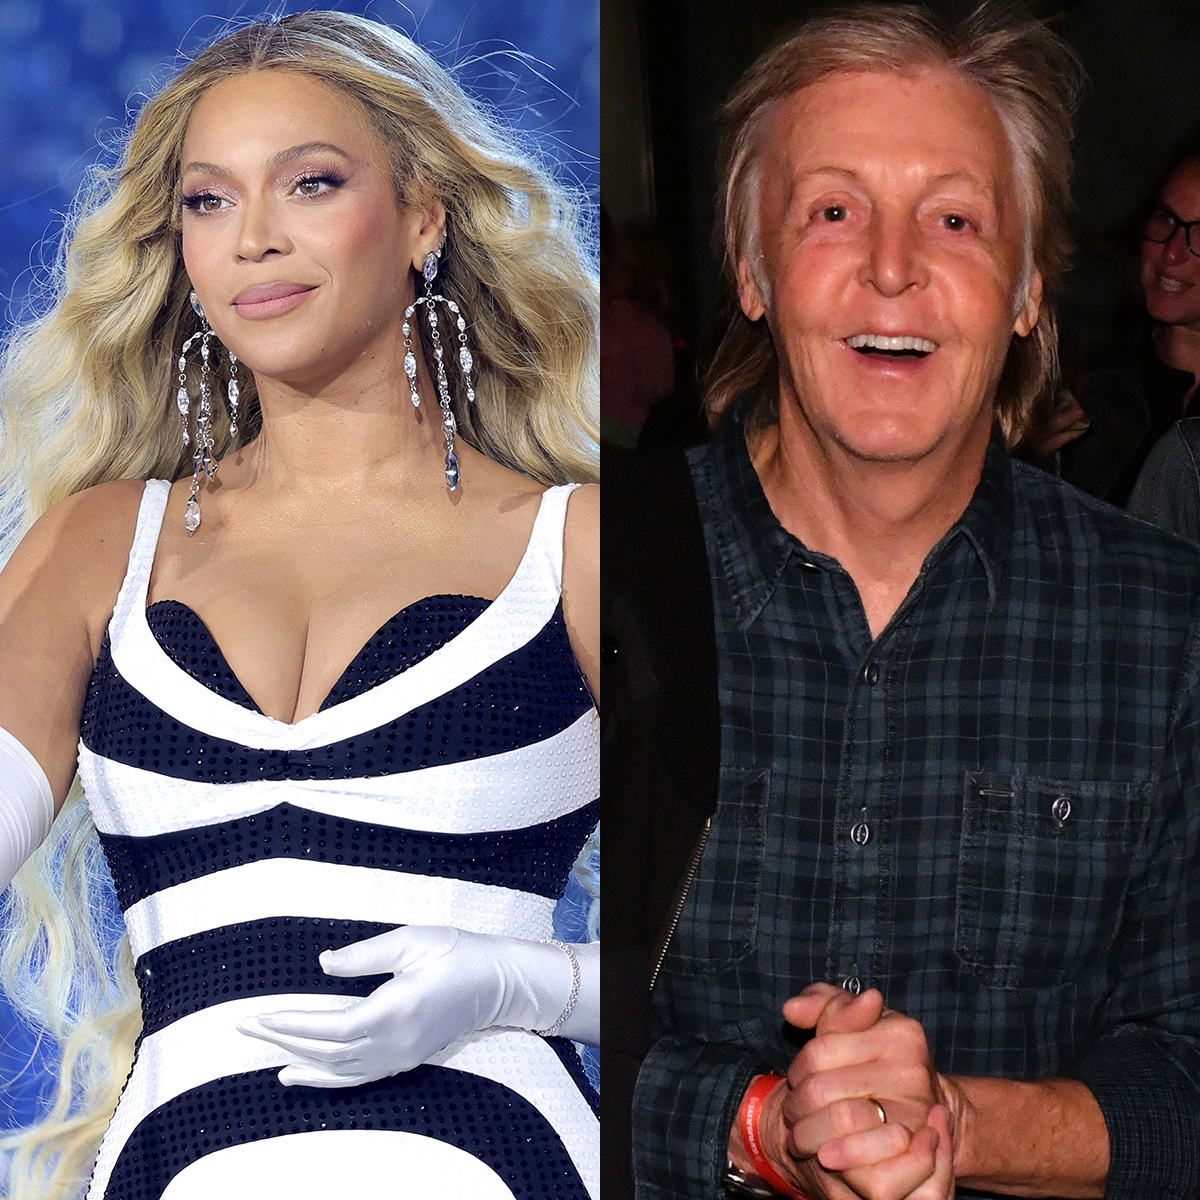 Paul McCartney Details Moving Conversation He Had With Beyoncé About "Blackbird" Cover